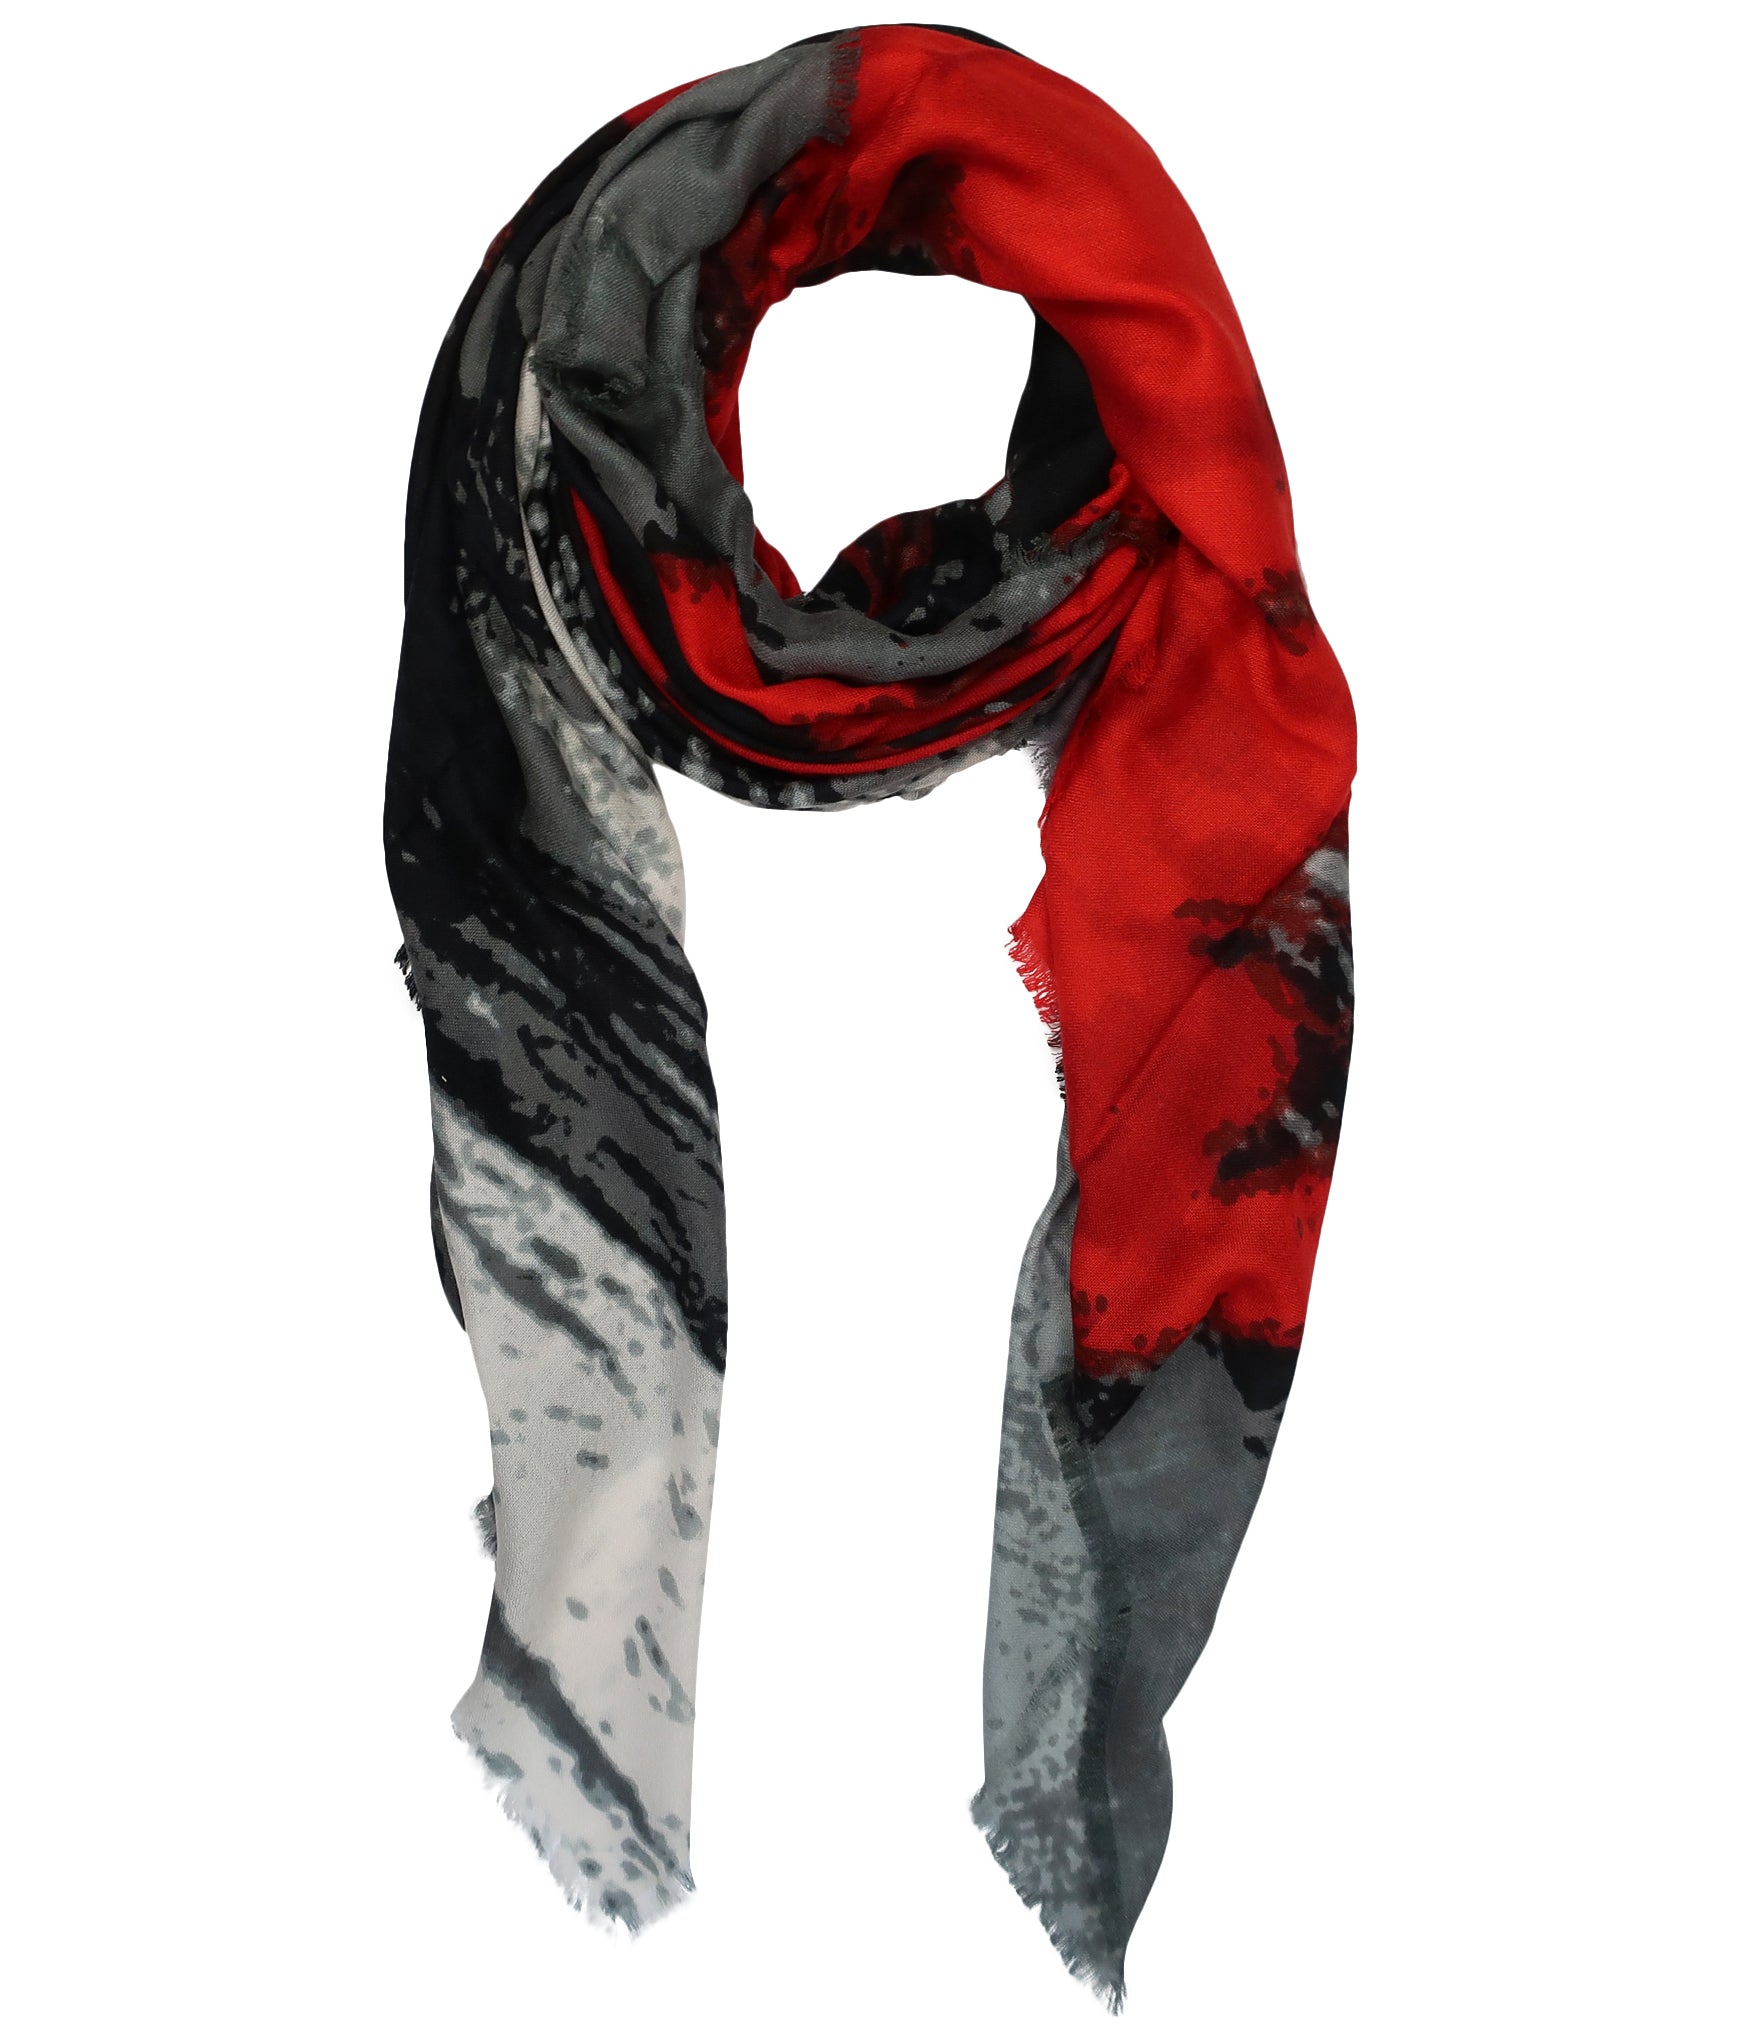 Blue Pacific Modal and Cashmere Scarf in Watercolor Crimson Red and Gray